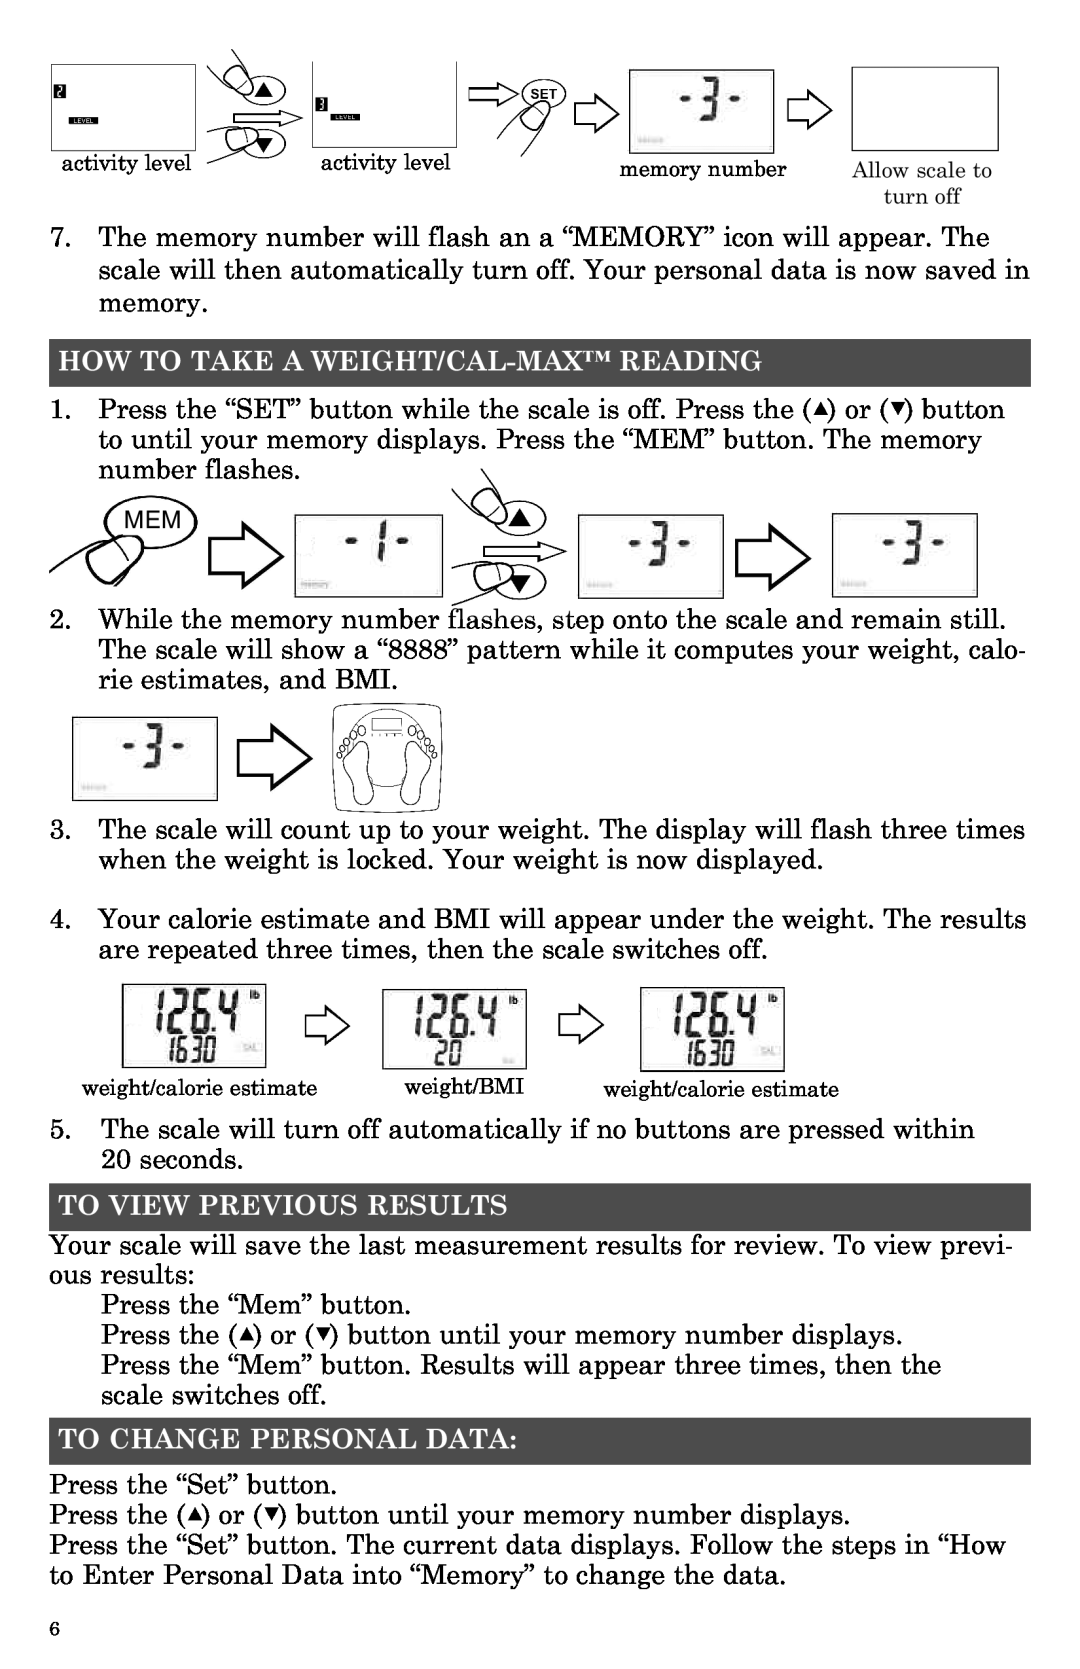 Taylor 7544BL instruction manual How To Take A Weight/Cal-Max Reading, To View Previous Results, To Change Personal Data 